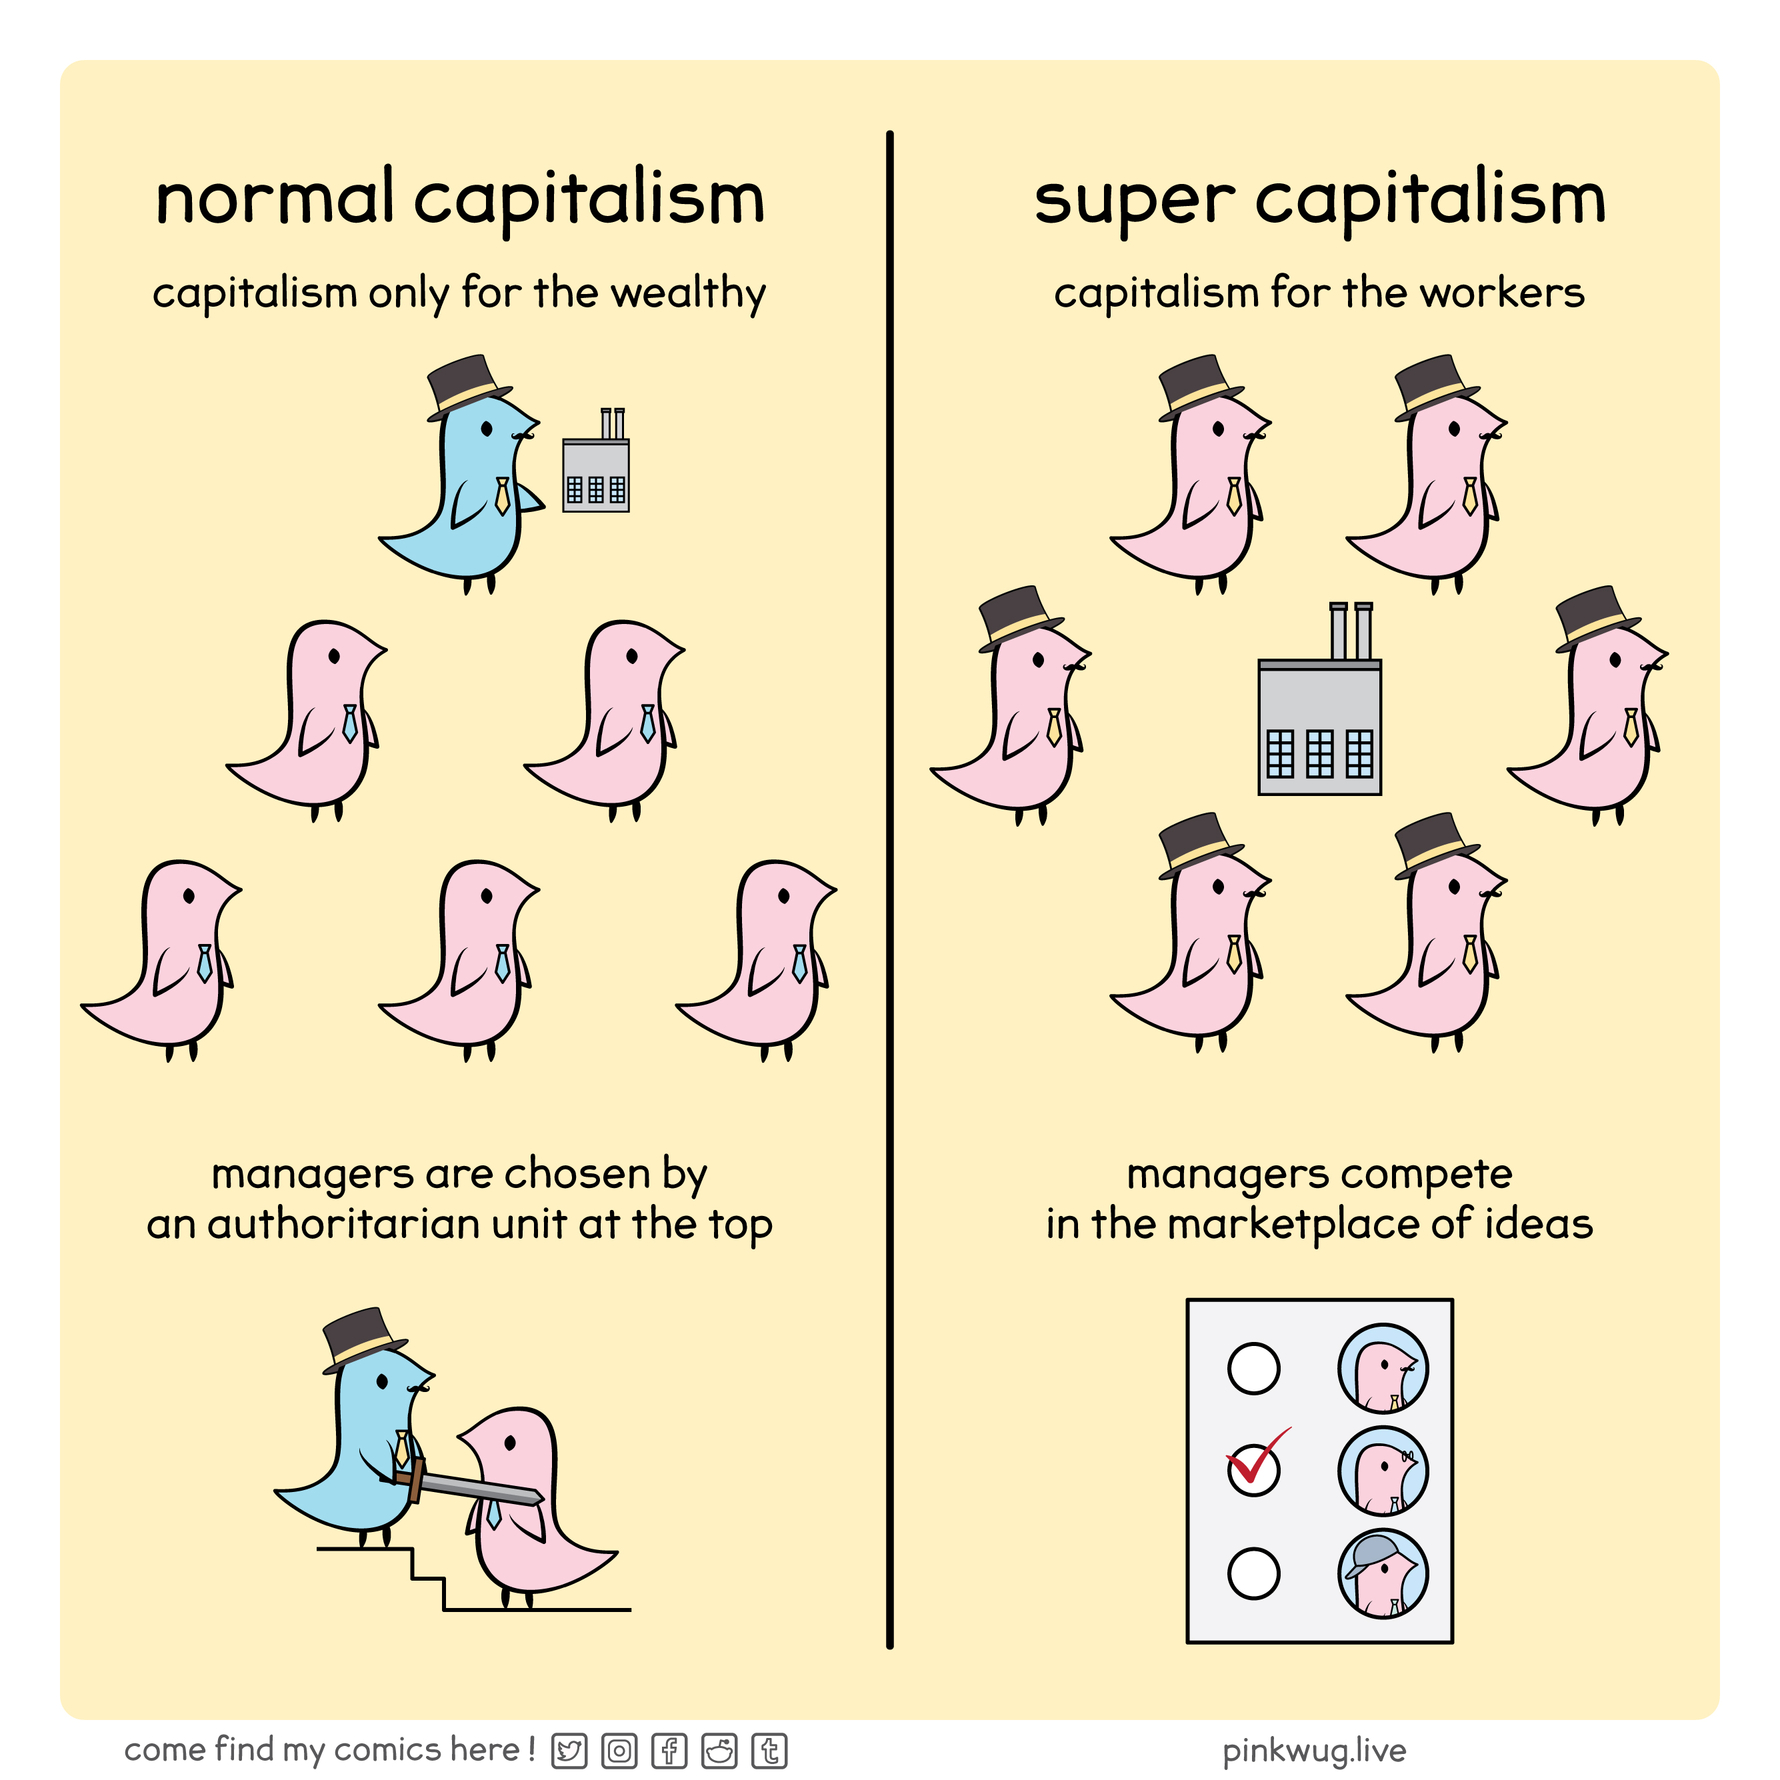 pinkwug comic: normal capitalism: 

capitalism only for the wealthy (image of the owner holding a mini factory at the top of a pyramid of workers)
managers are chosen by au authoritarian unit at the top (image of owner knighting a manager)

supercapitalism:

capitalism for the workers (image of workers around the factory)
managers compete in the marketplace of ideas (image of a ballot where managers are elected)